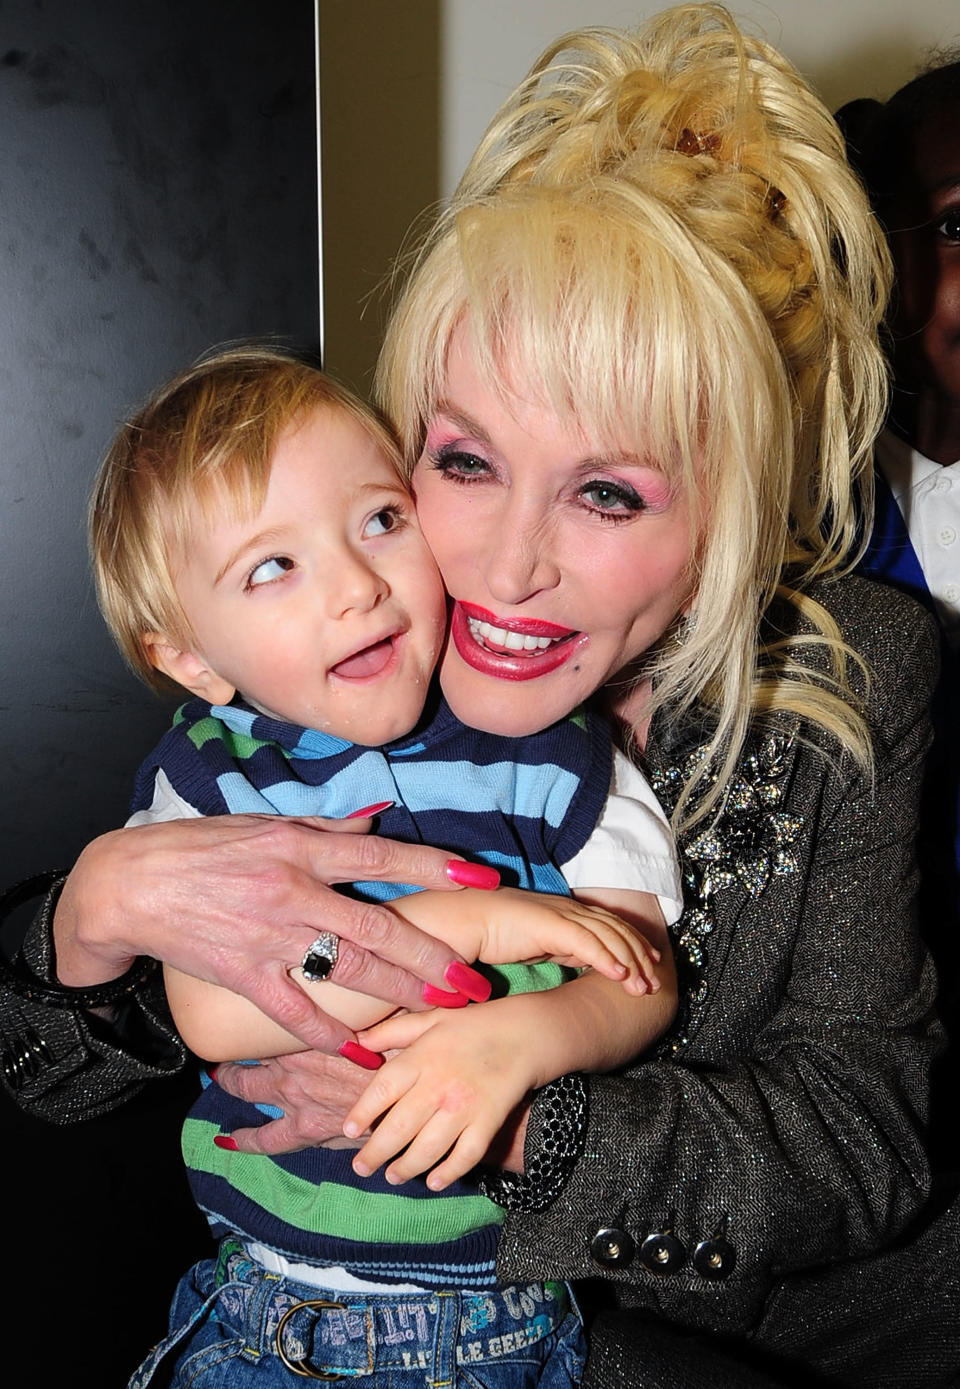 All the proceeds from Parton's new children's album will go to her children's literacy charity, Dolly Parton's Imagination Library.&nbsp; (Photo: Pool via Getty Images)